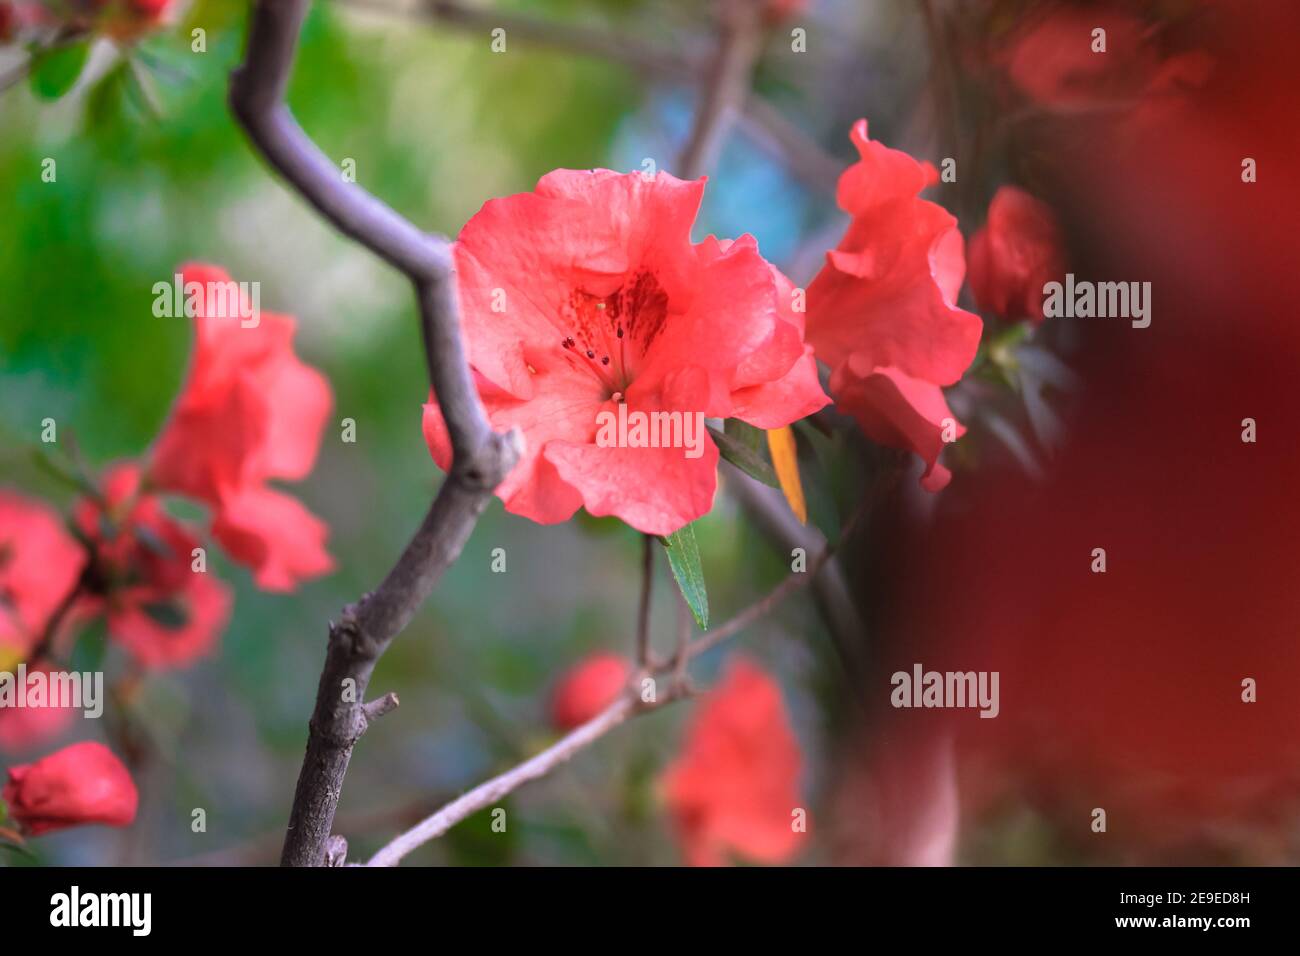 Red azaleas in bloom, rhododendron tree with flowers against green foliage background. Garden plant care. Place for text. Stock Photo